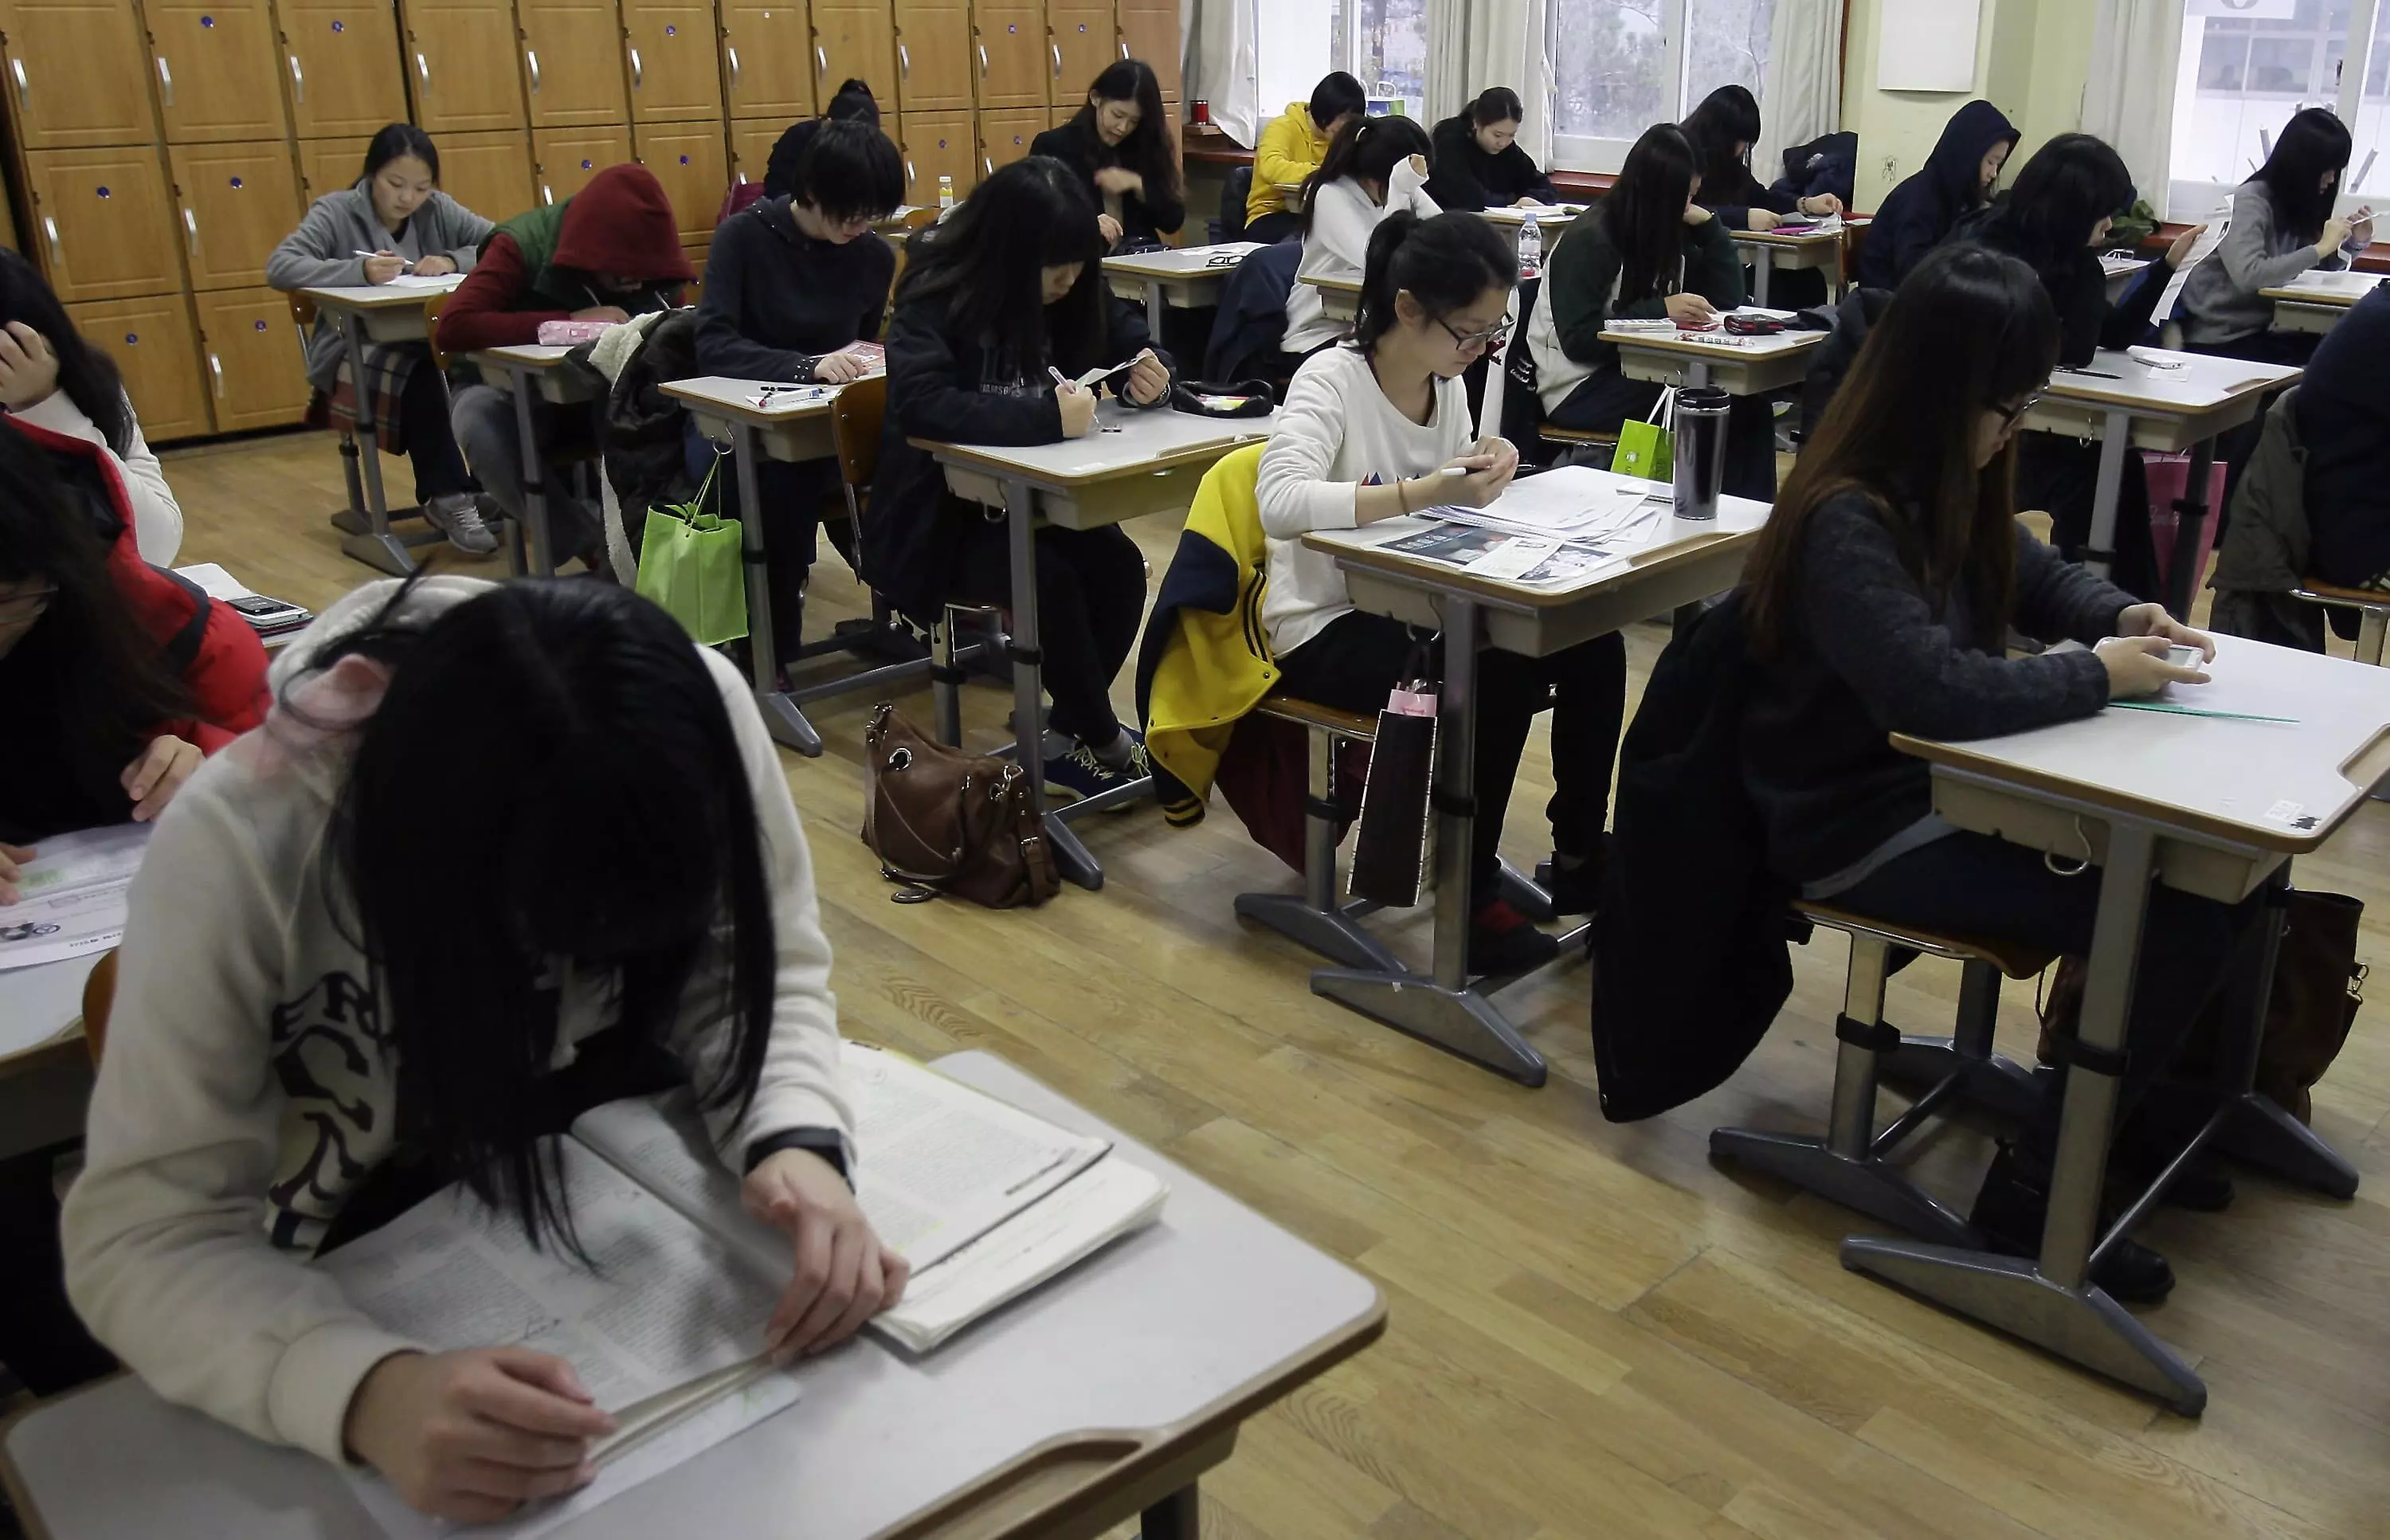 Race Against the Bell: South Korean Students Take Legal Action Over Exam Bell Mishap